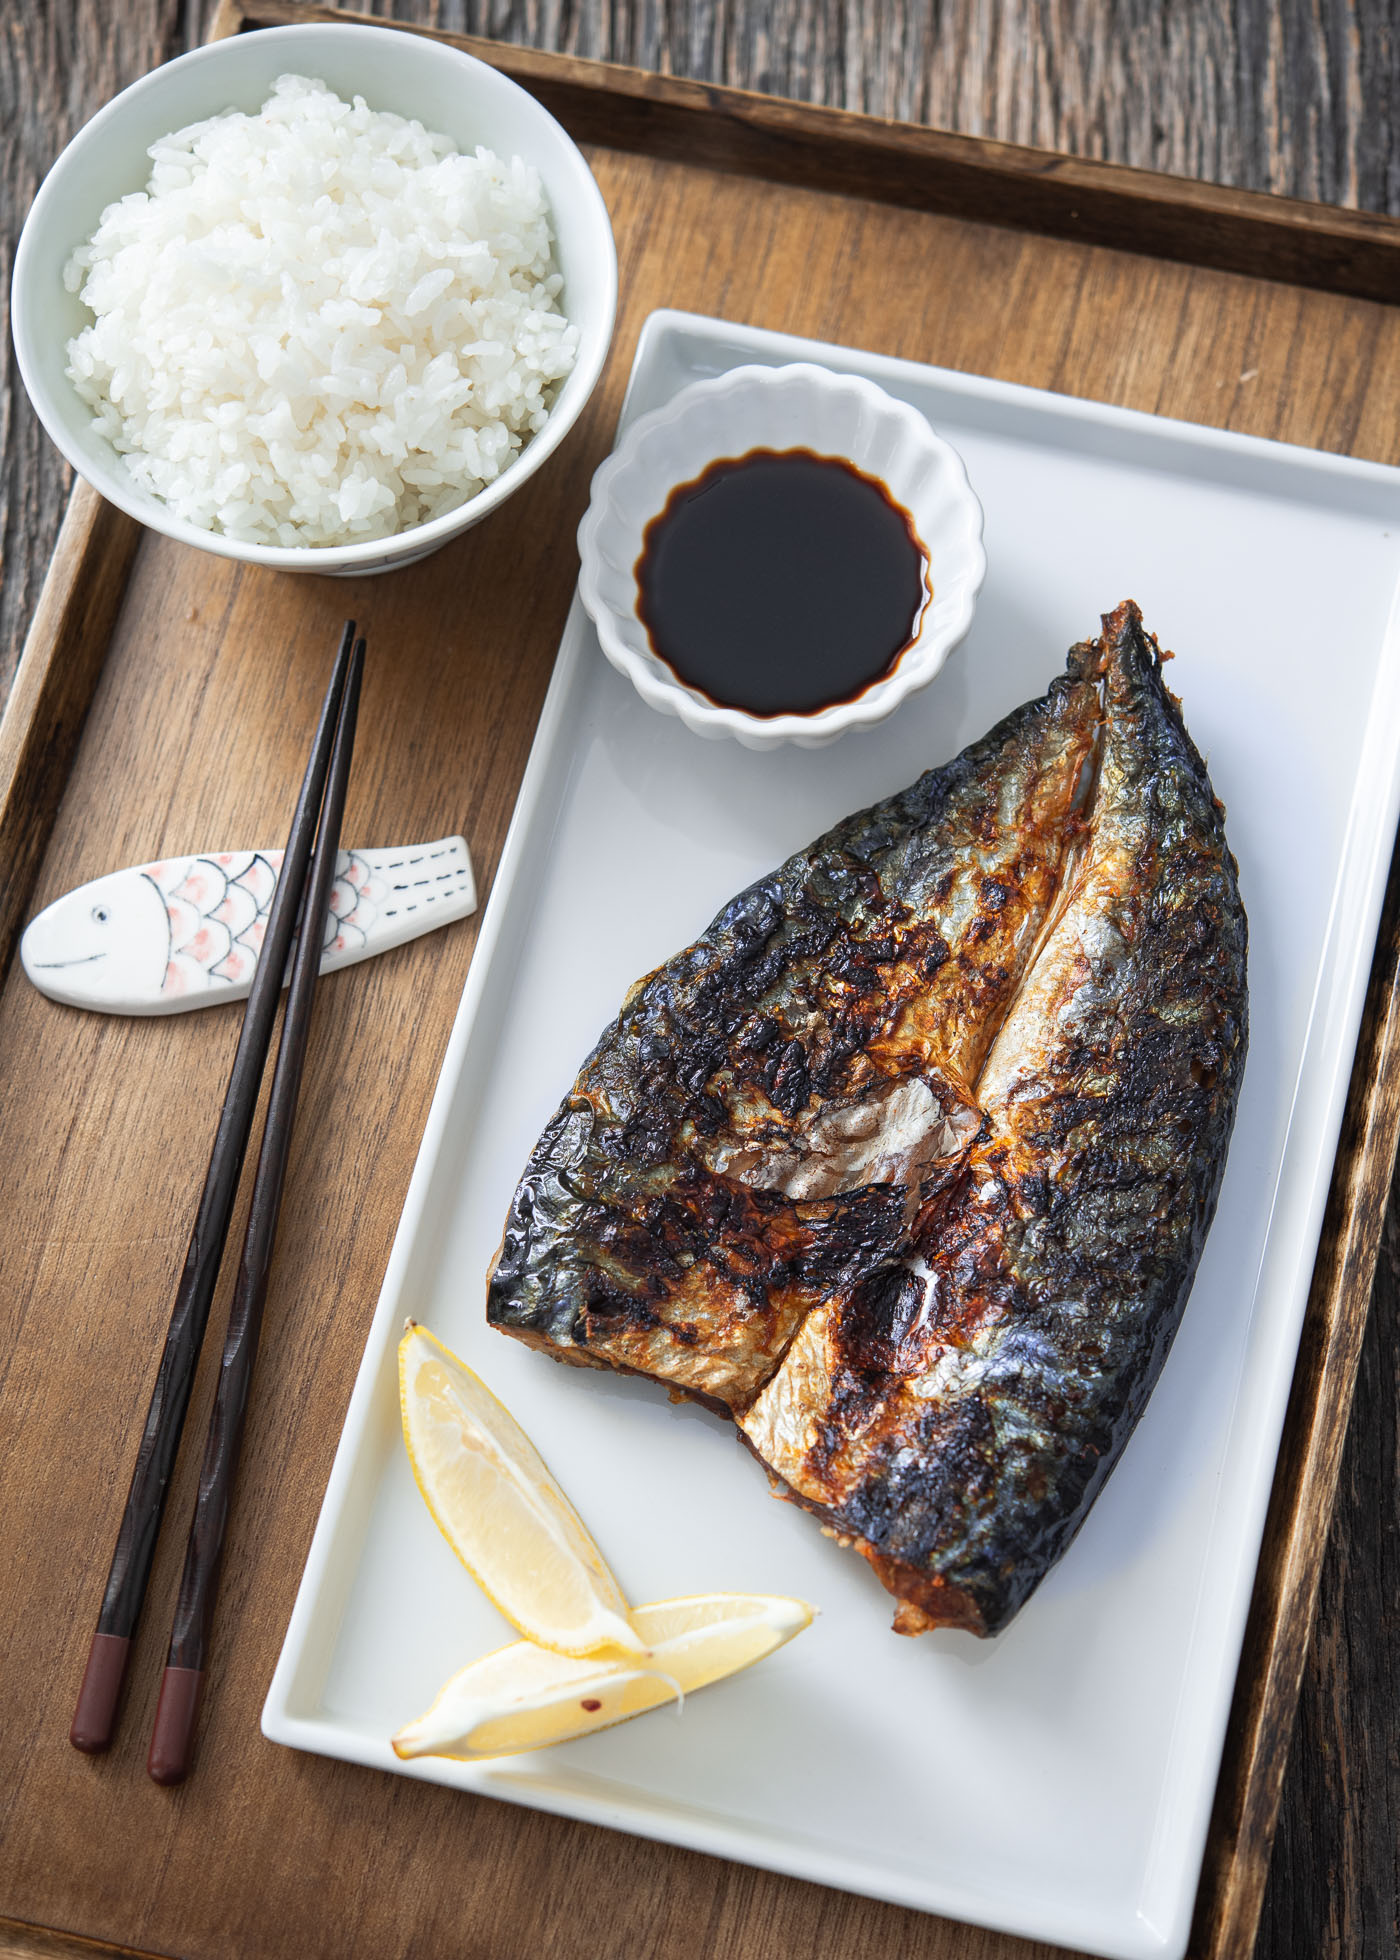 Grilled mackerel fish fillets with soy sauce, lemon wedges, and rice.